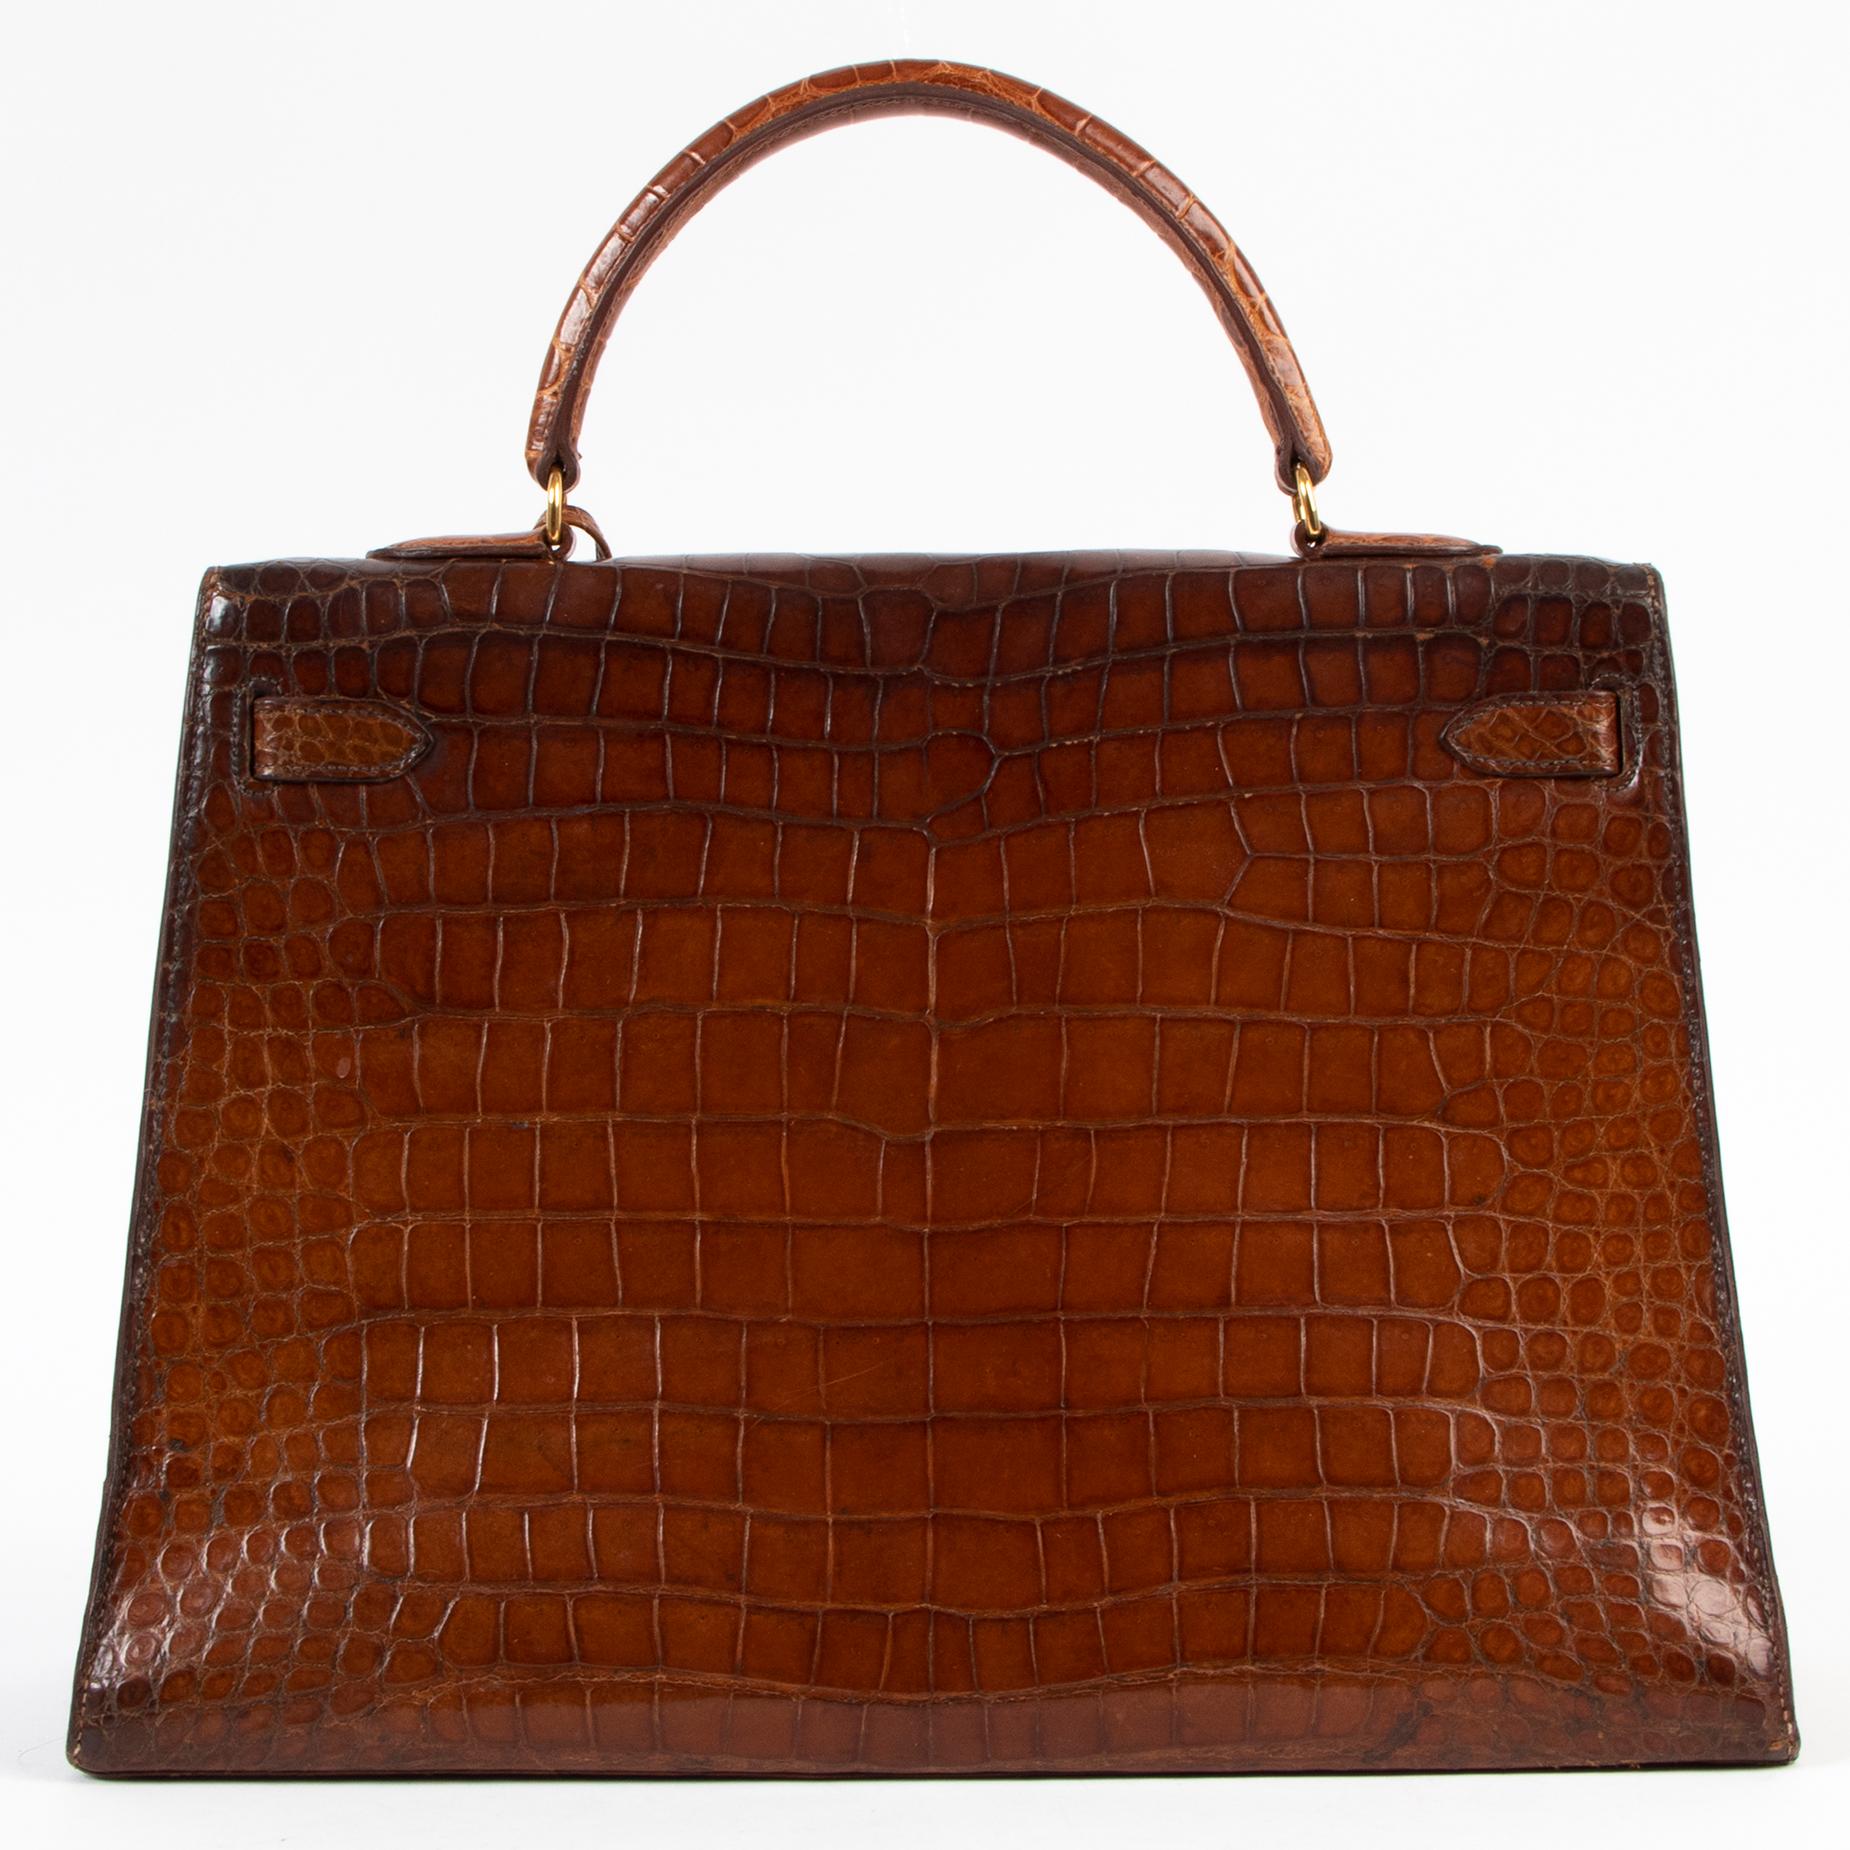 Hermès Vintage Kelly 35 Porosus Crocodile Miel Gold Hardware

It's like fine wine, the Hermès Kelly bag gets better with age. This vintage Kelly 35 in exquisite Porosus Crocodile skin is no exception.

The semi-shiny Porosus leather is one of the